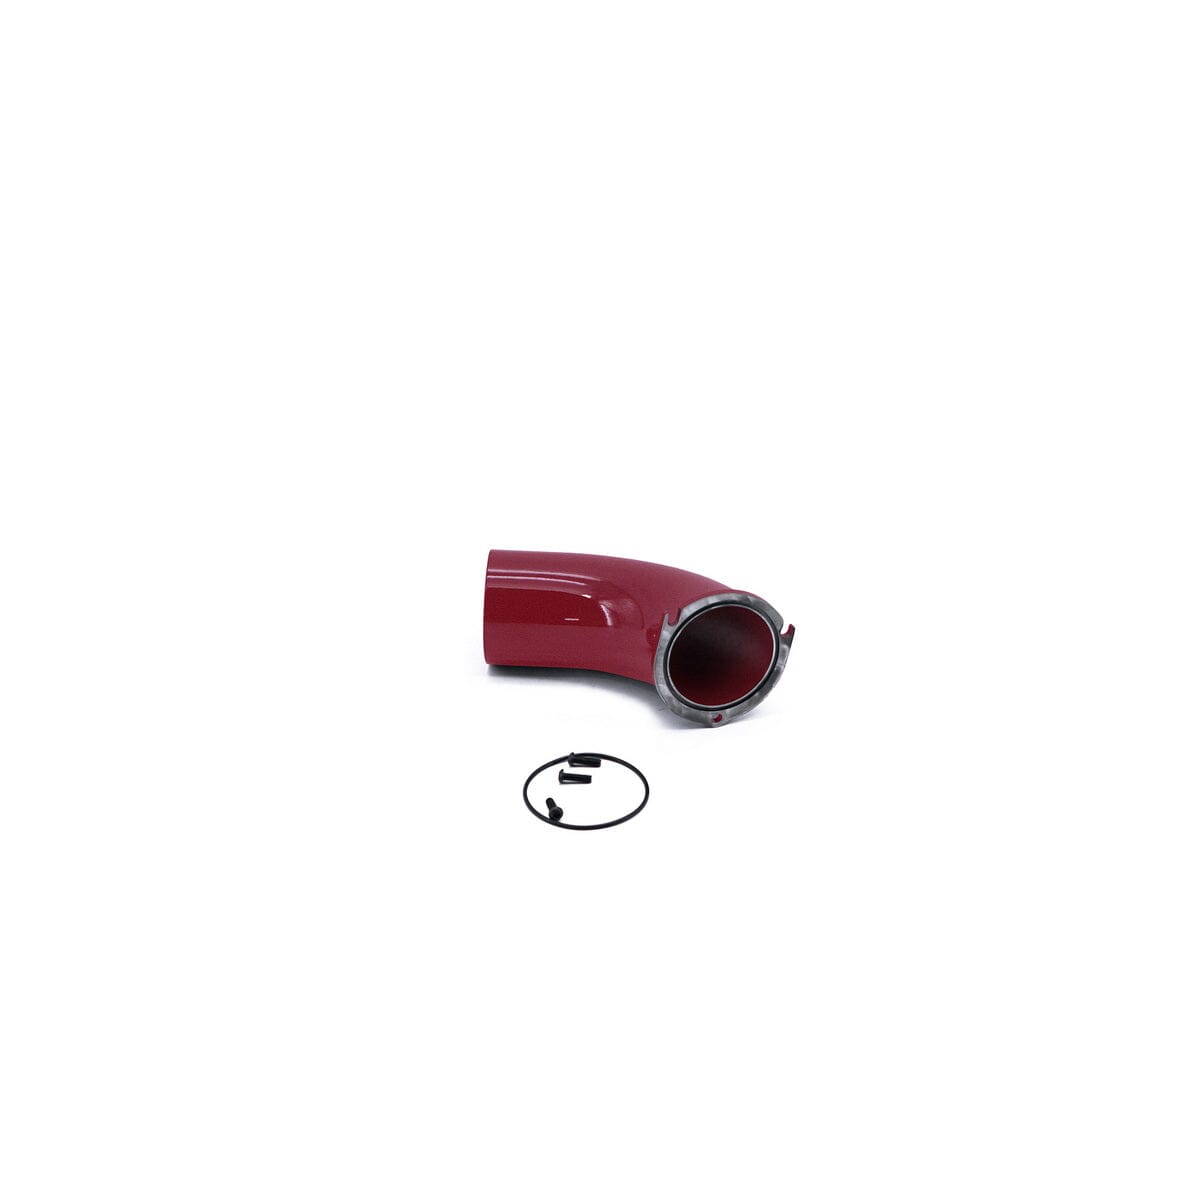 HSP Stock Turbo Inlet Horn (2001-2004 Chevrolet / GMC) Turbocharger Mounting Kit HSP Diesel Candy Red 